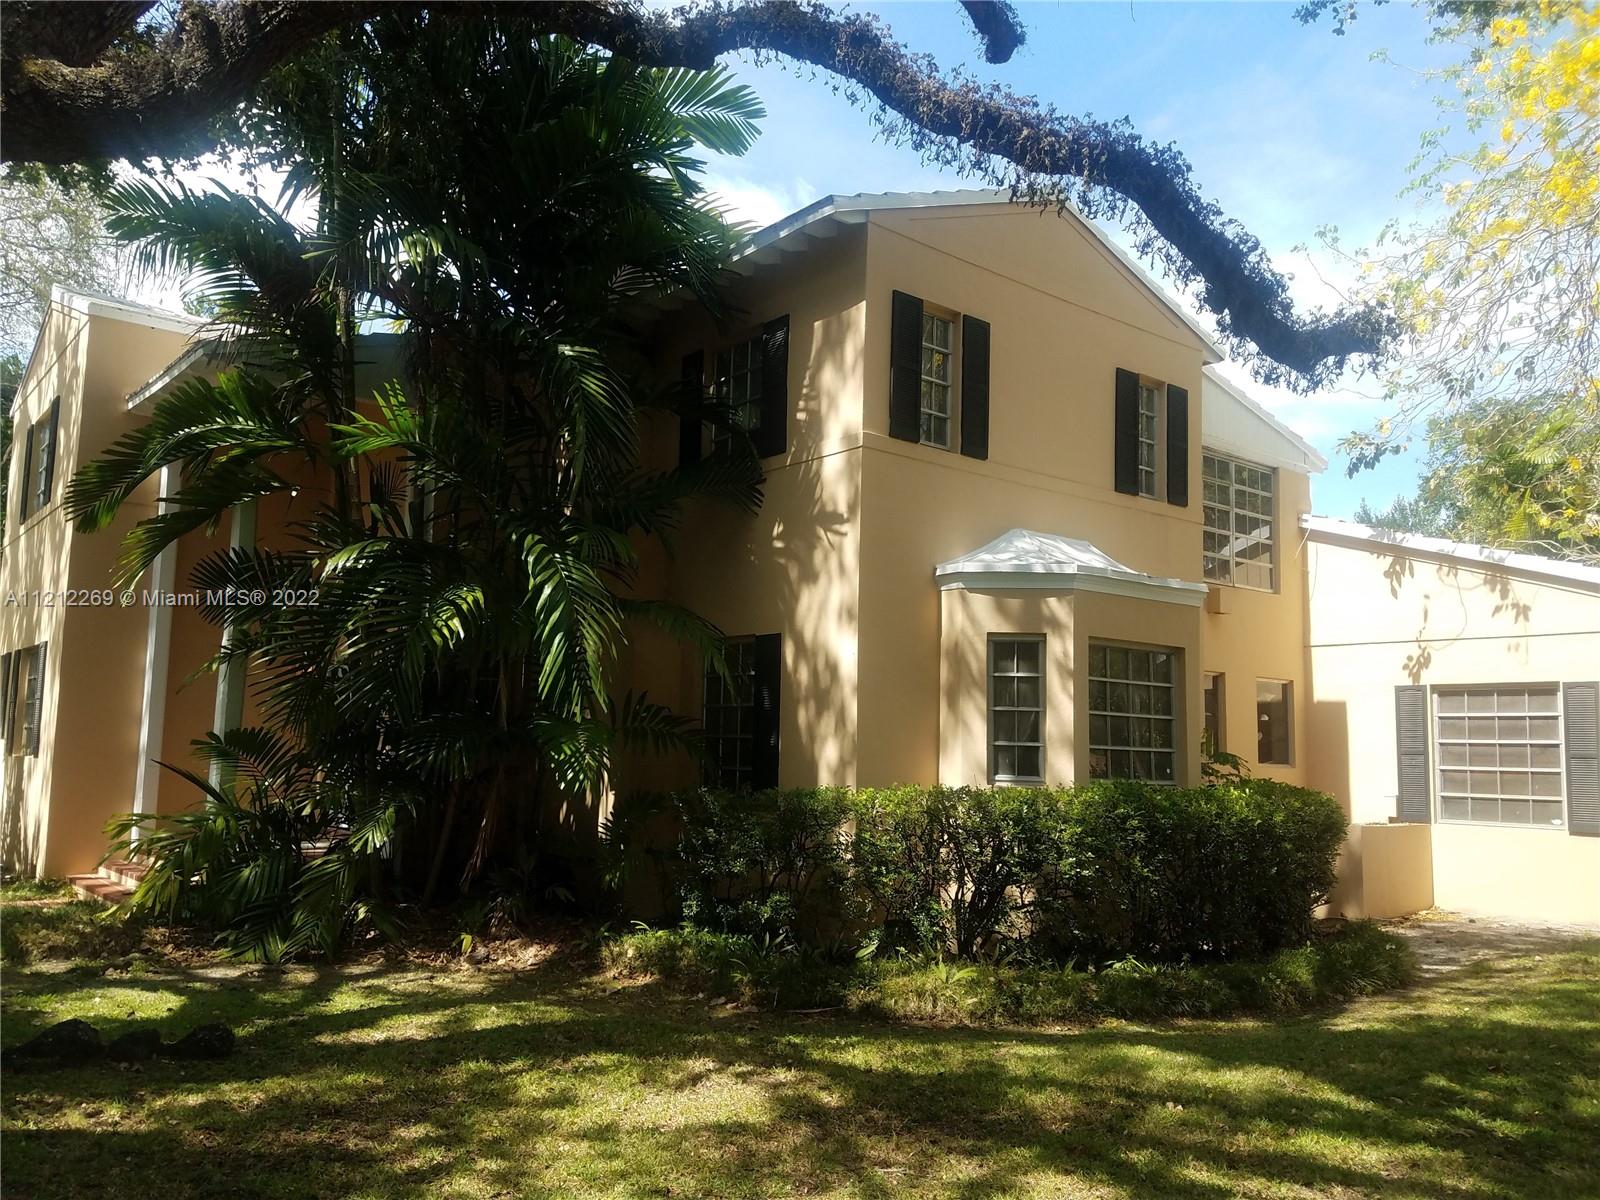 Photo 22 of 3211 Anderson Rd in Coral Gables - MLS A11212269